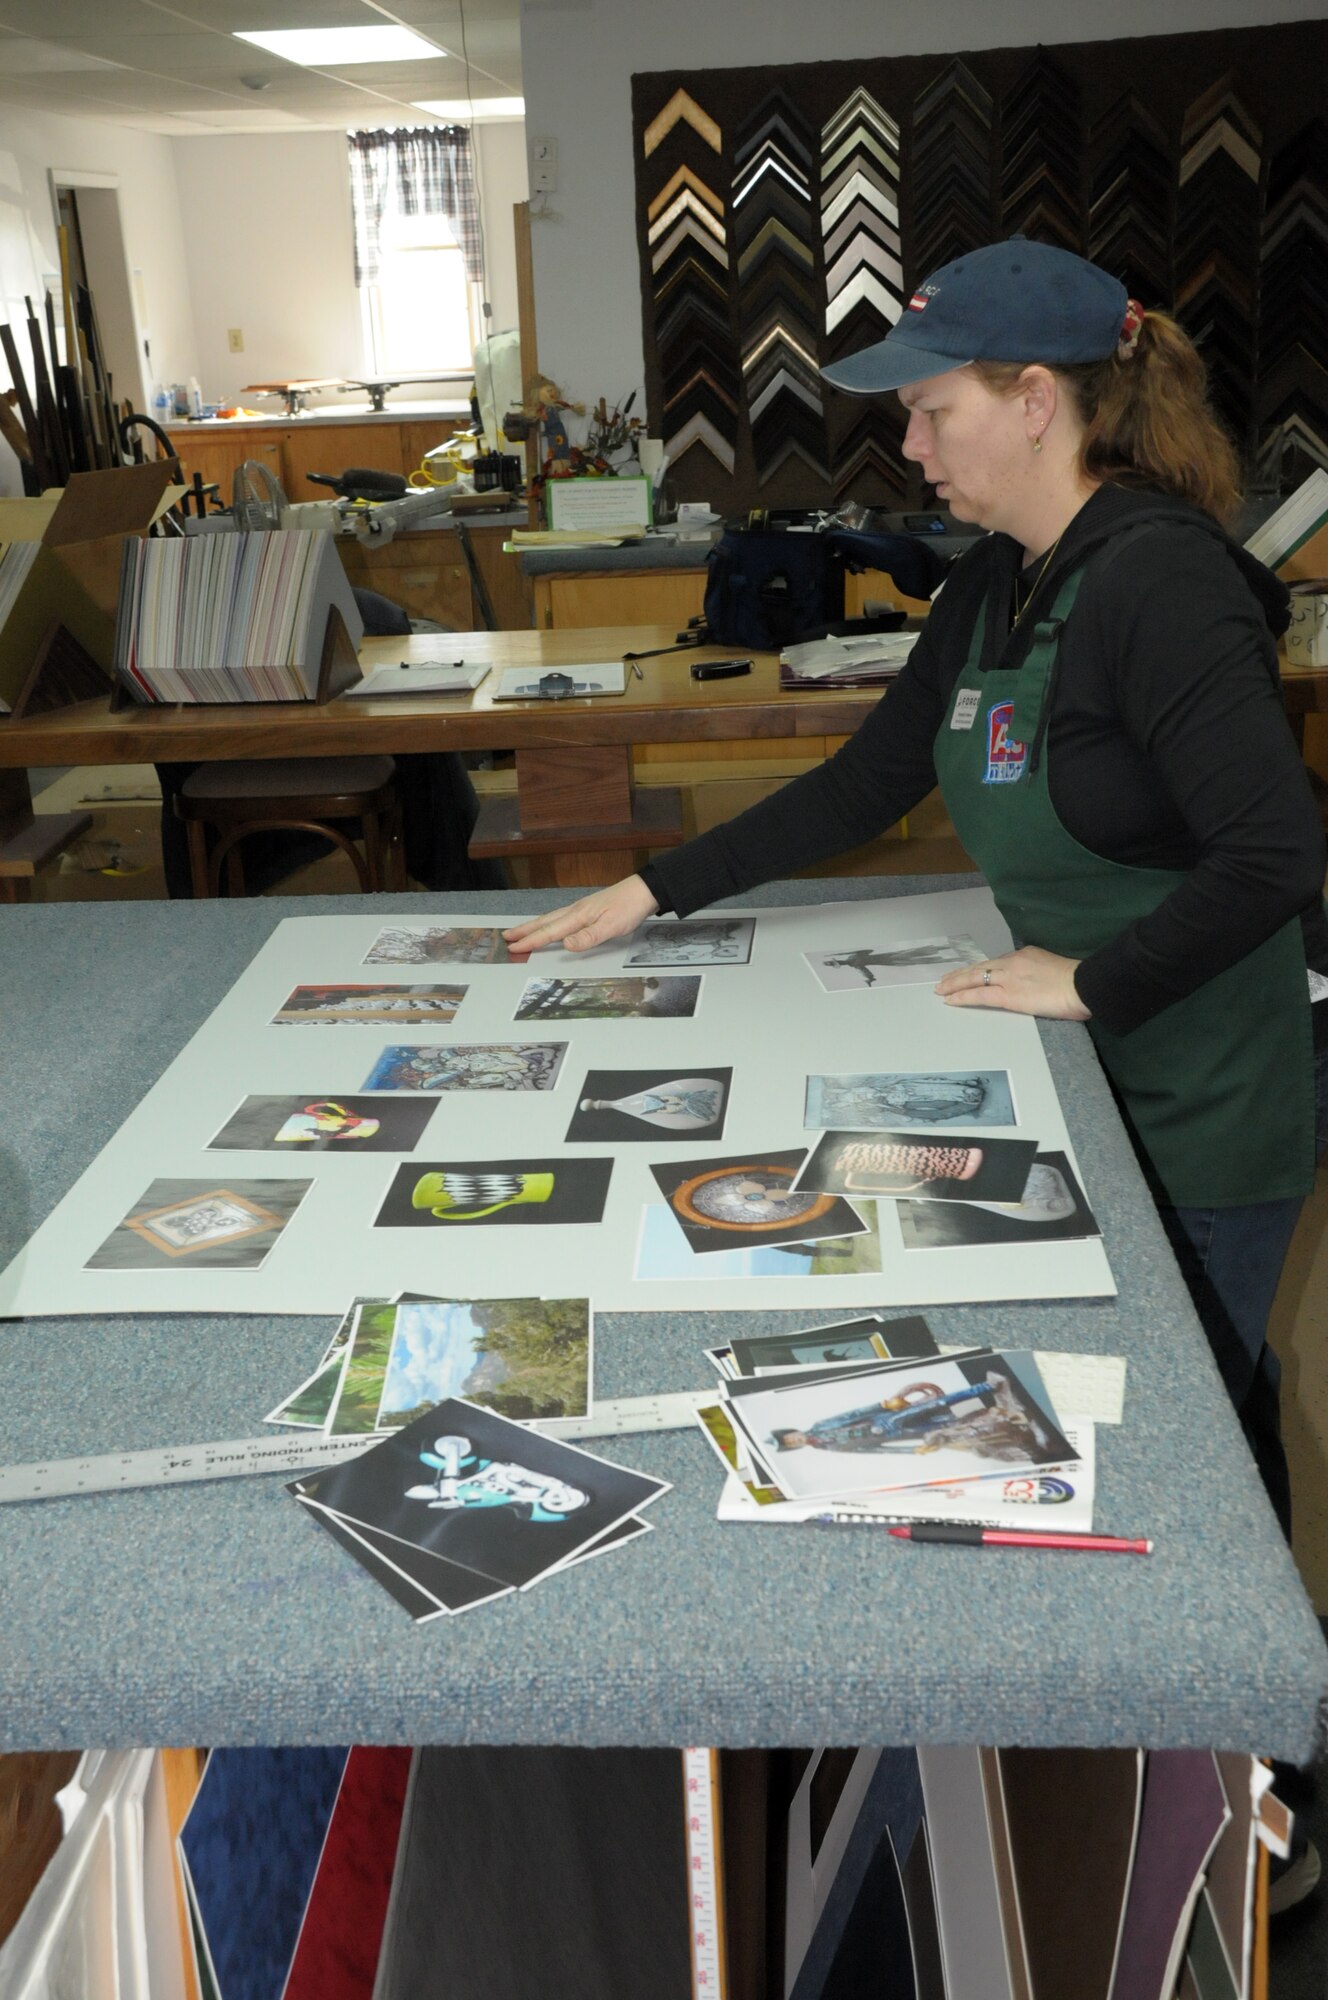 Kimberly Fetterer assembles a layout of work produced by Warren members for the Air Force gallery submission at the Art and Crafts Hobby Shop here Jan. 26. (U.S. Air Force photo by Blaze Lipowski)